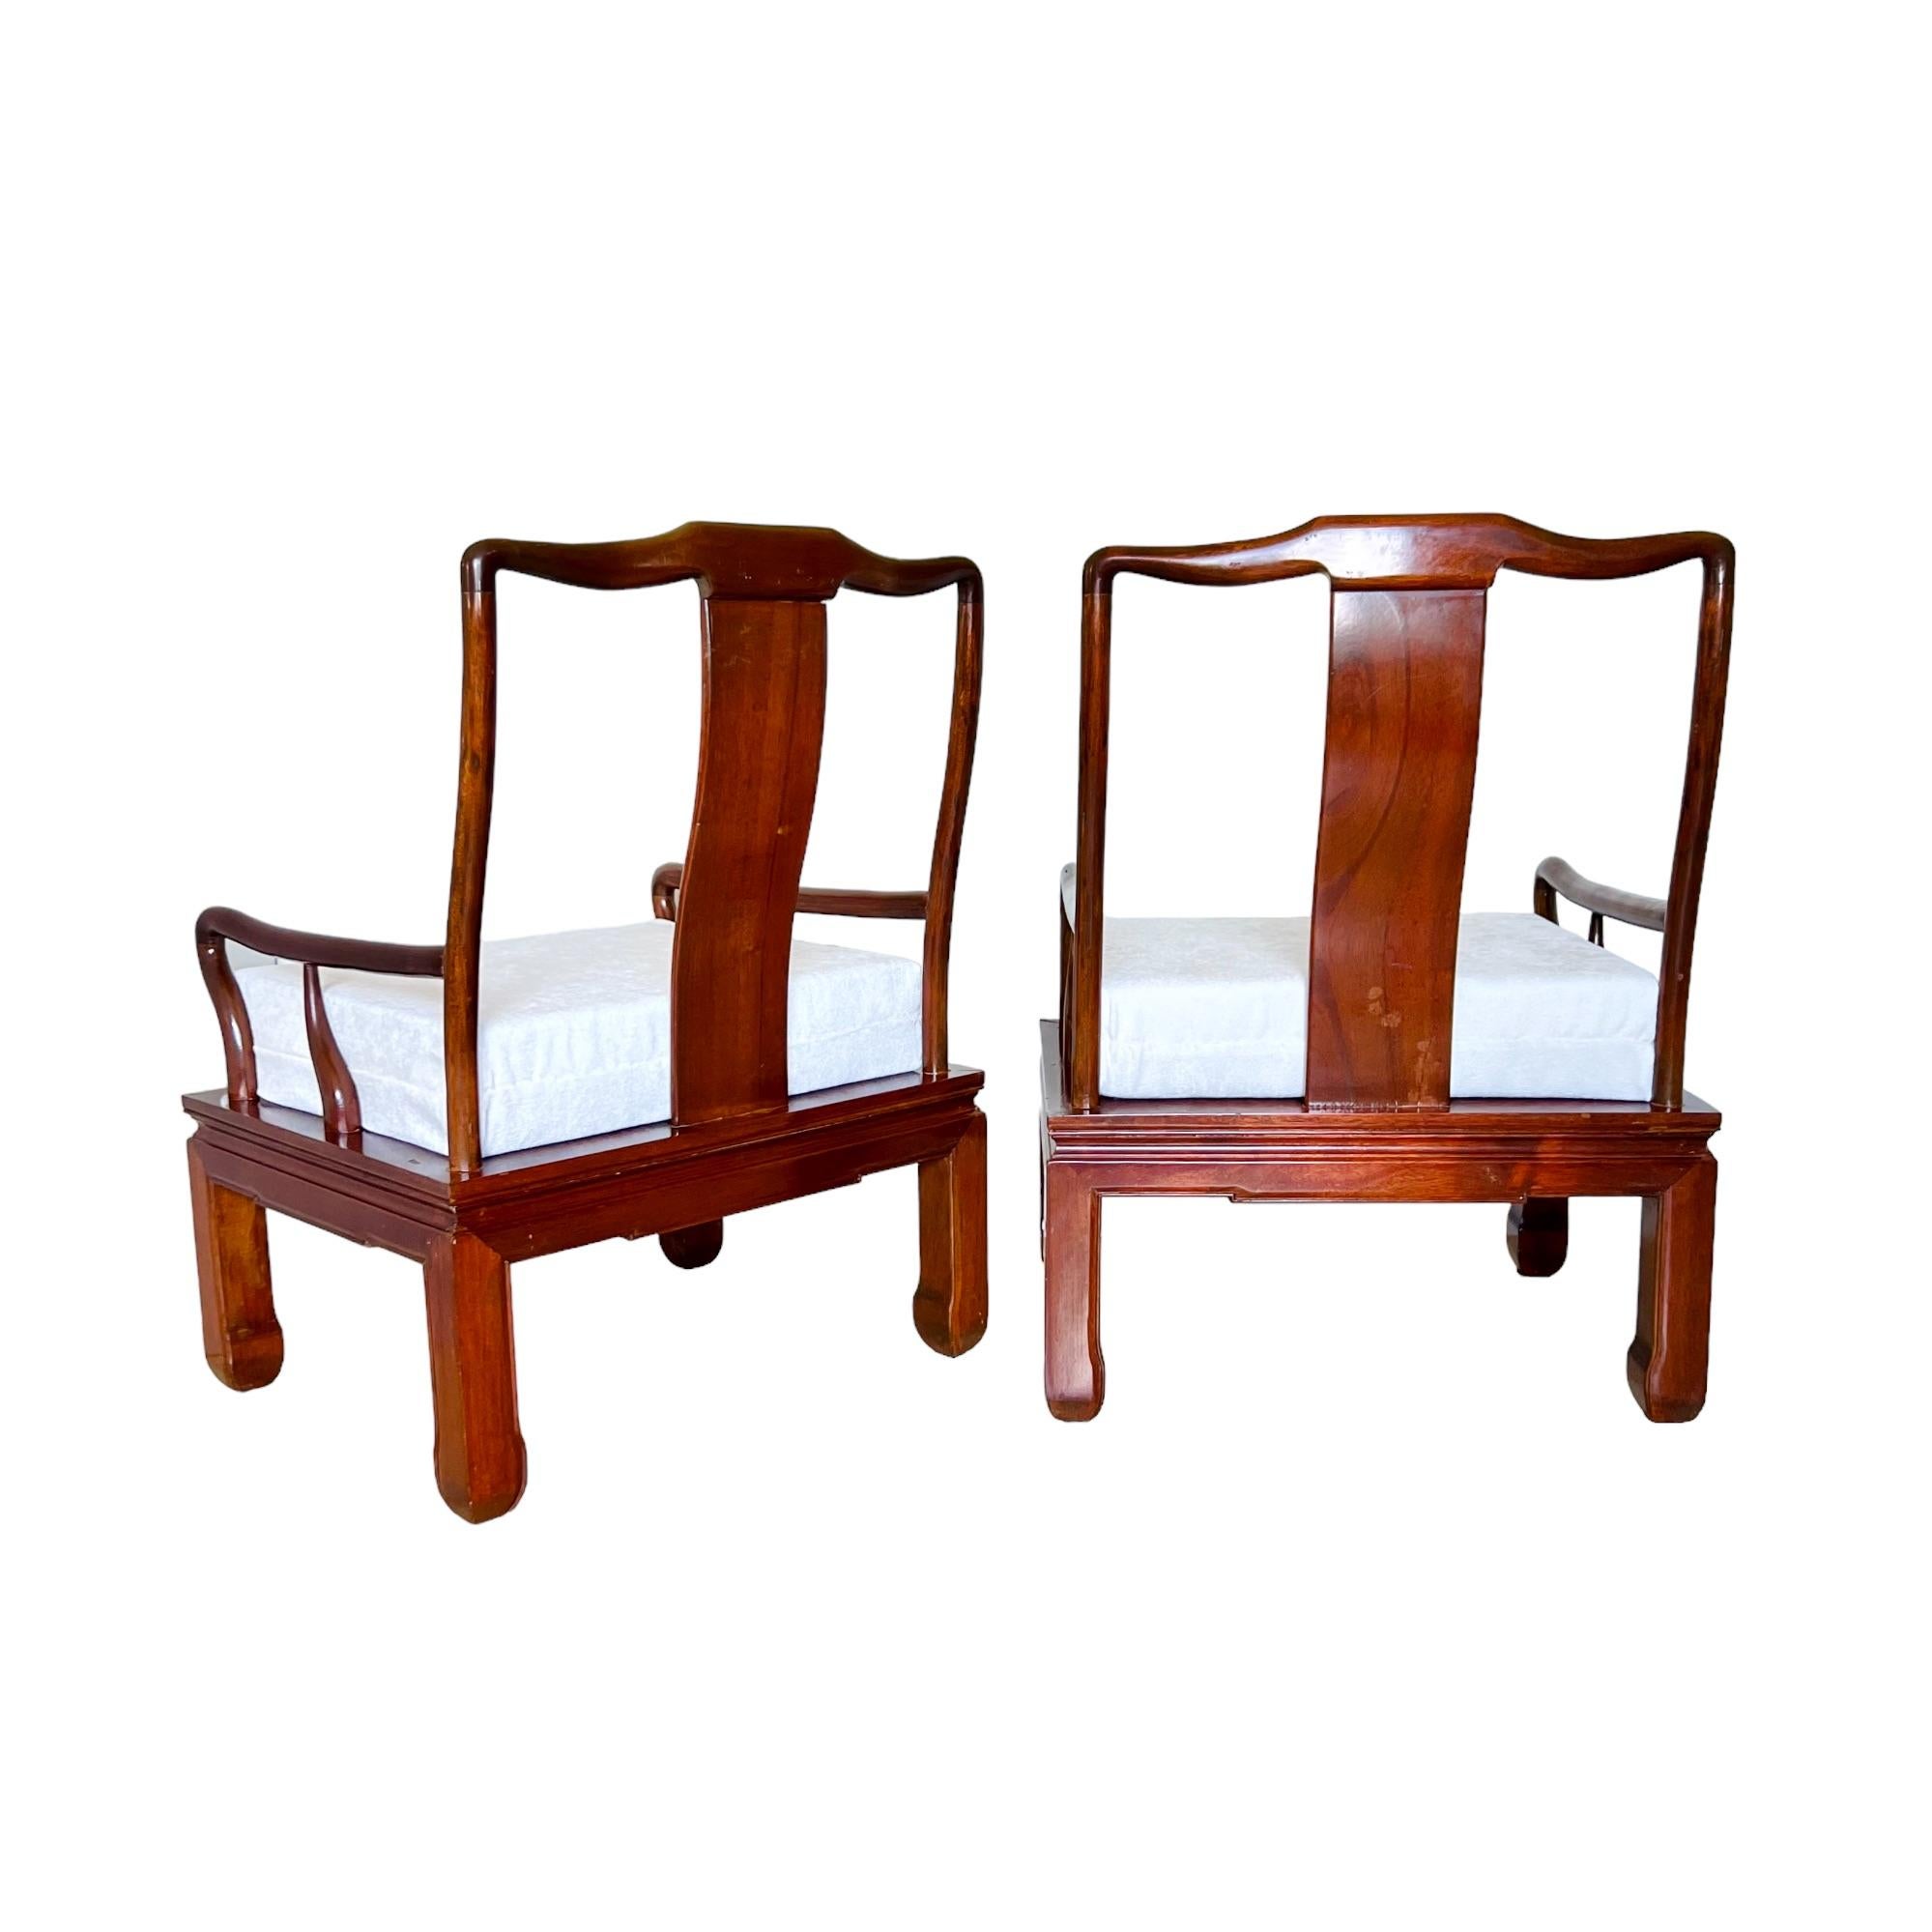 Fabric Vintage Chinese Ming Style Arm Chairs, a Pair For Sale